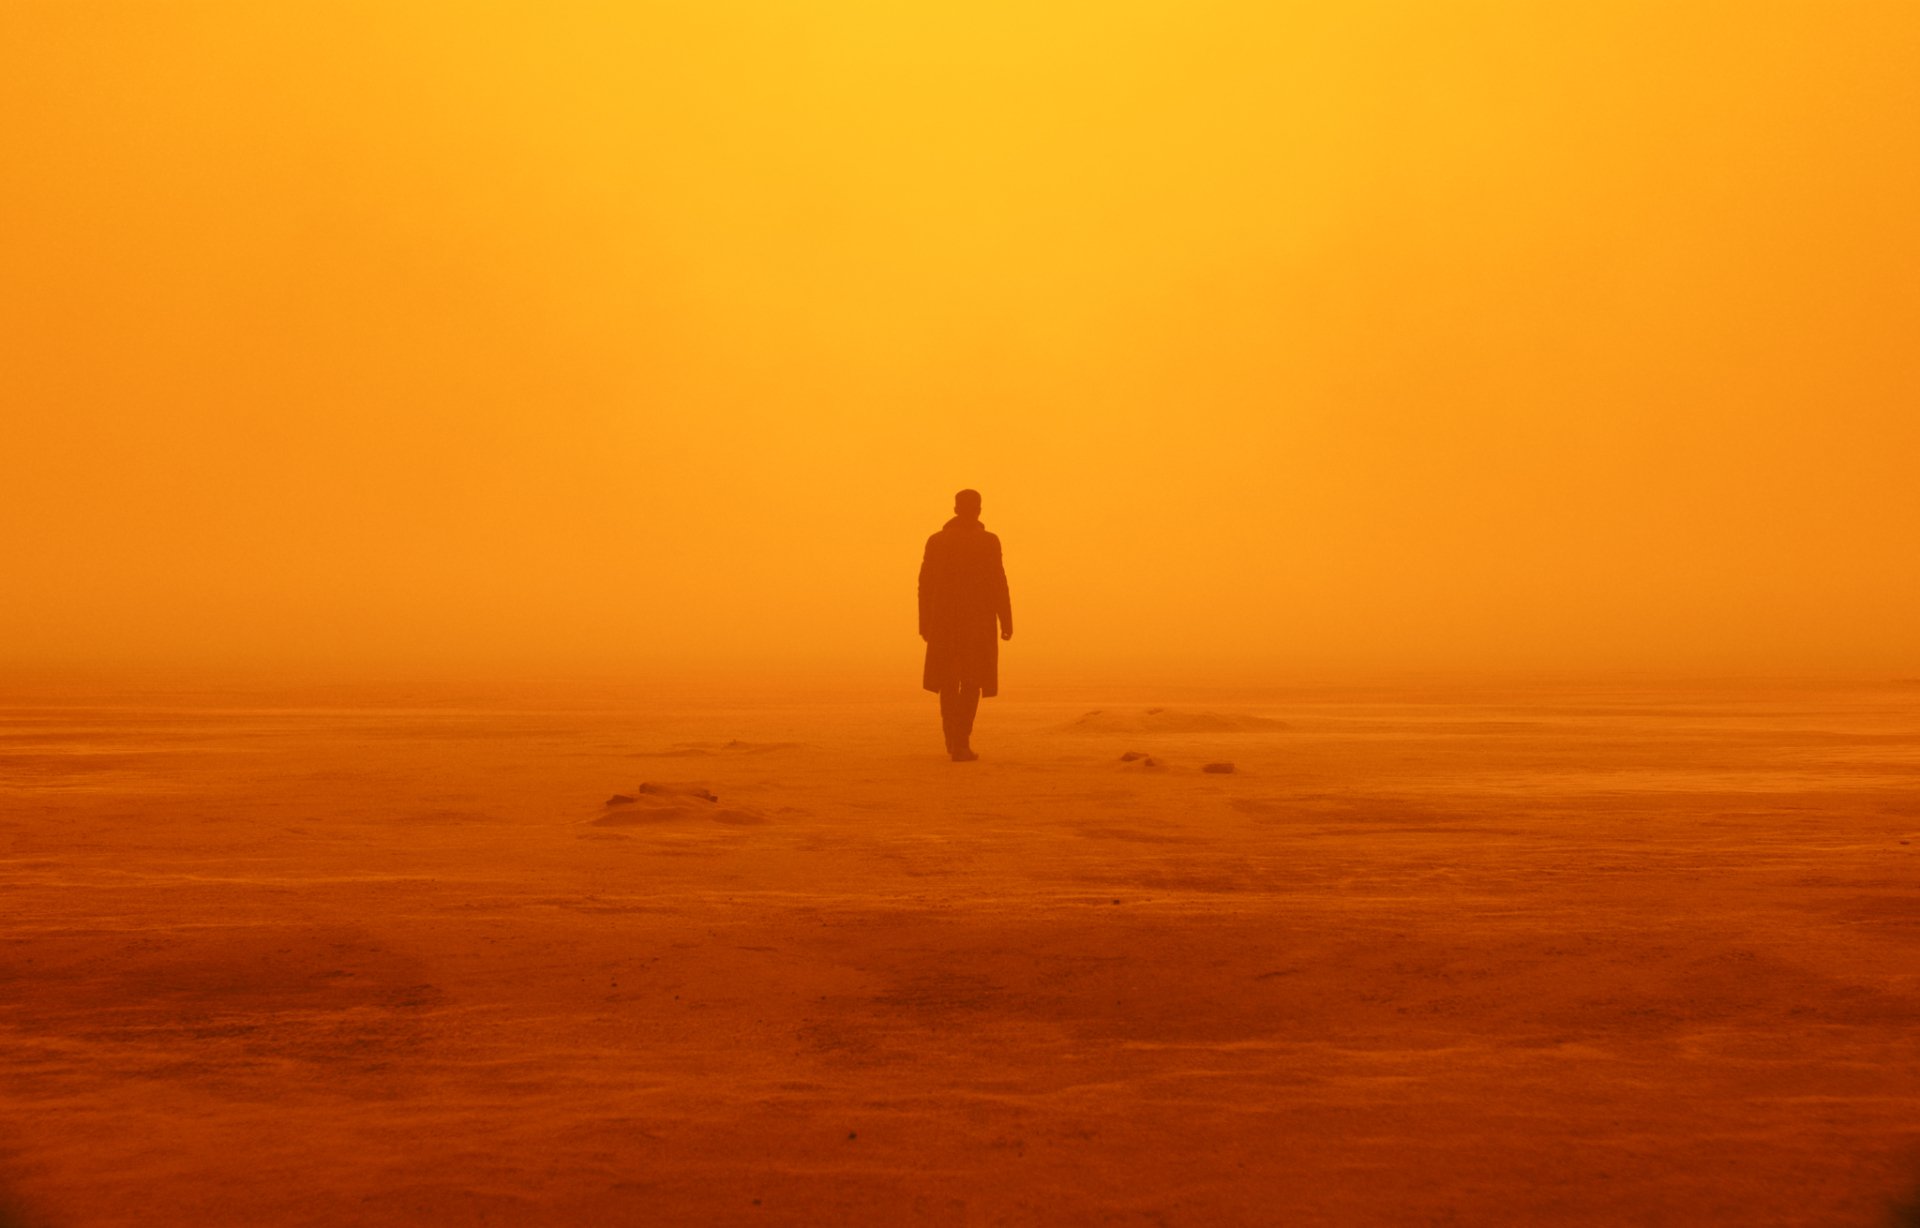 90+ Blade Runner 2049 HD Wallpapers and Backgrounds